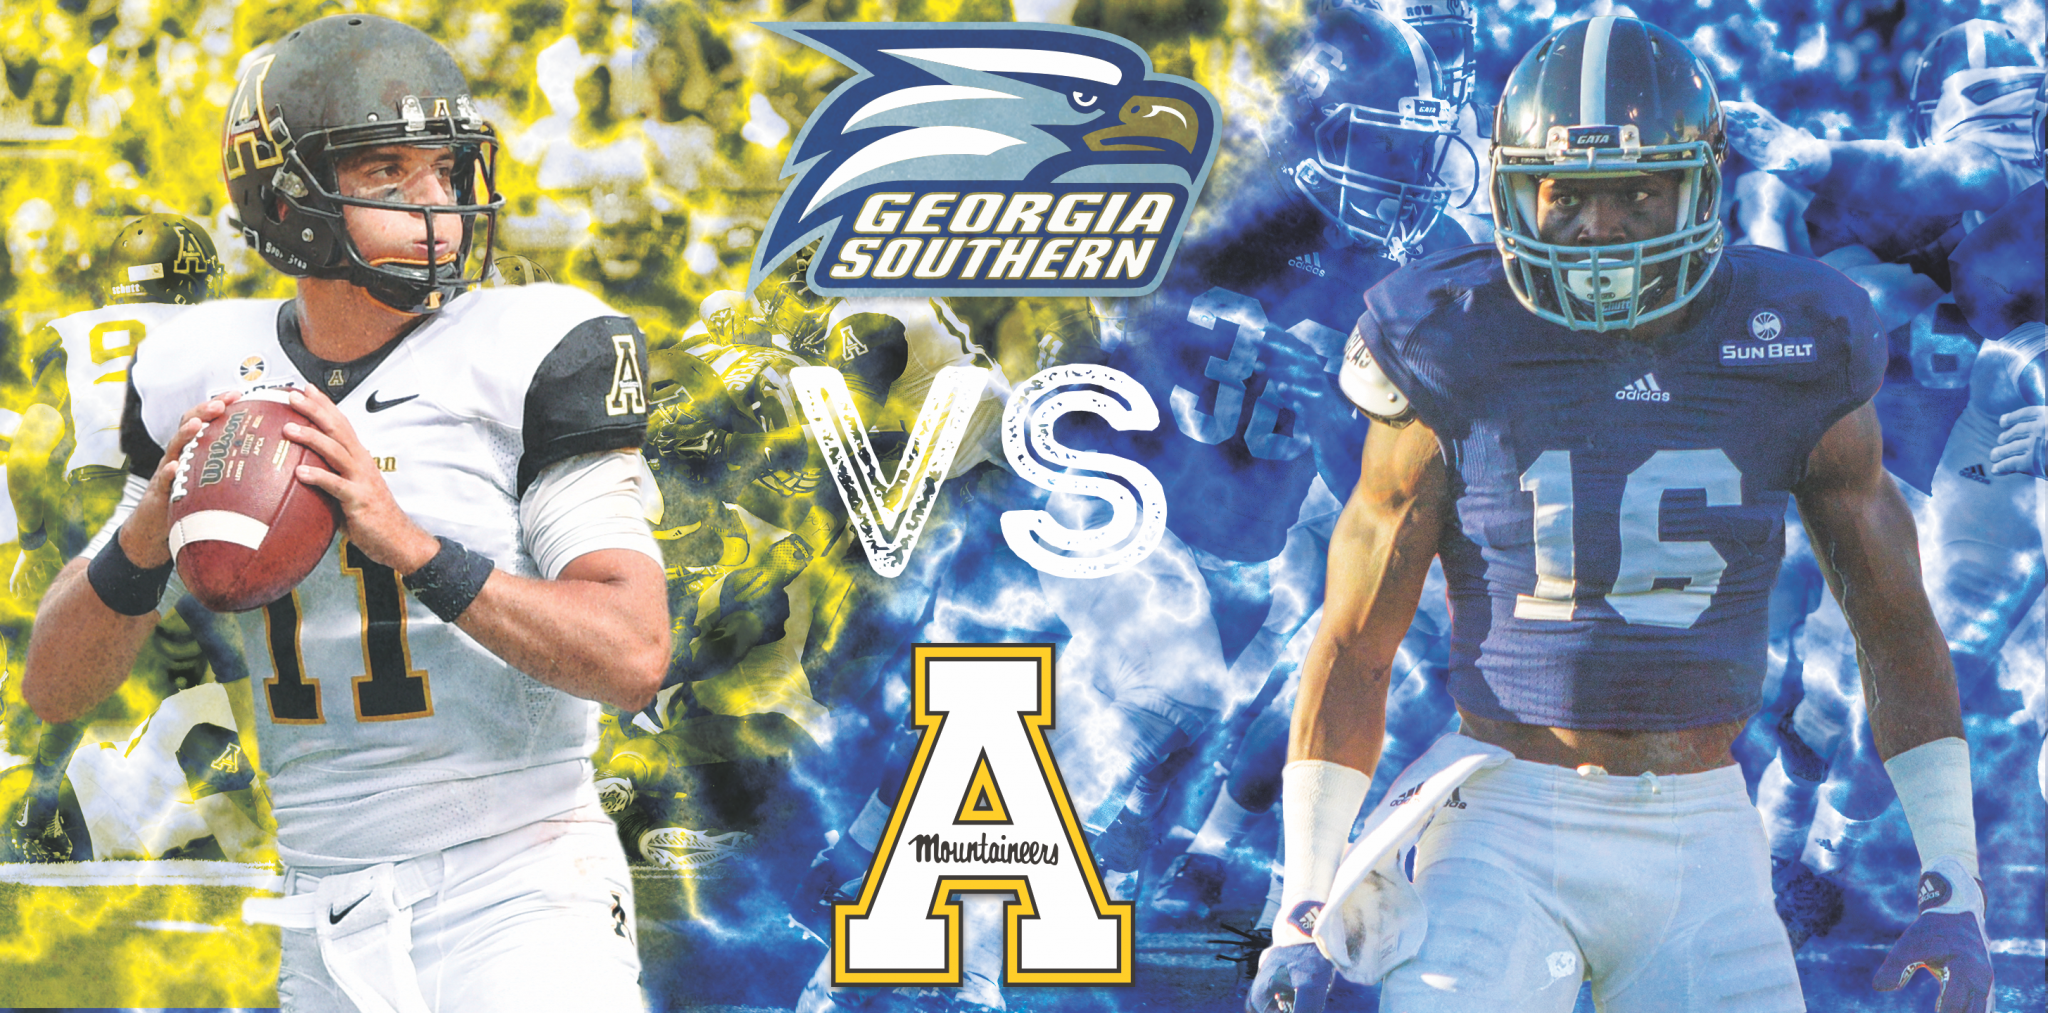 Head to Head: Why Georgia Southern will kick Apps